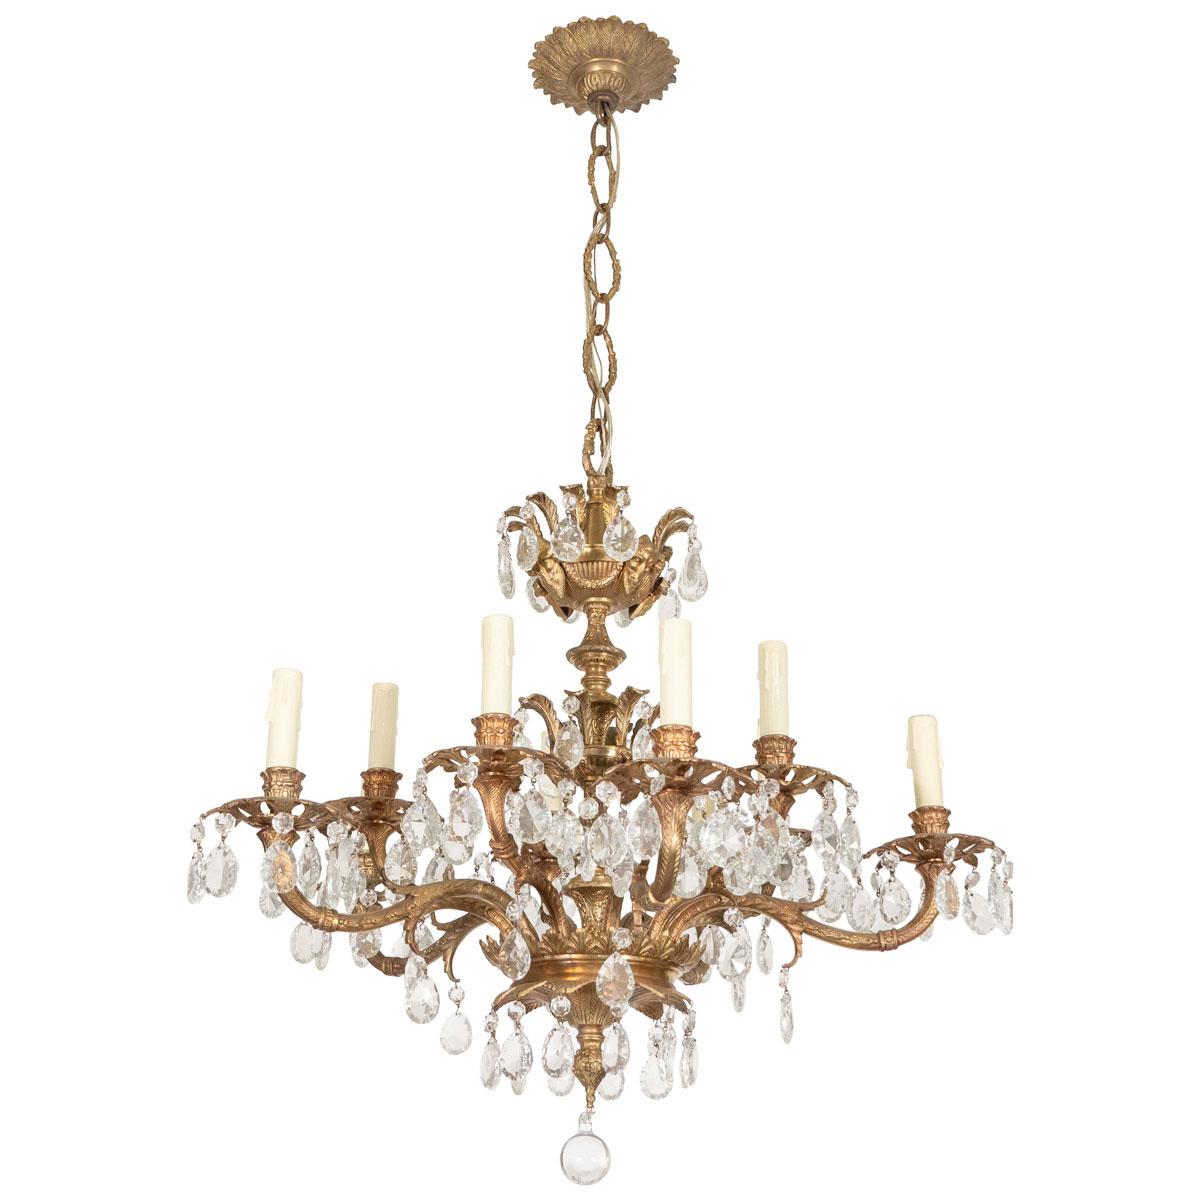 Gilt metal crystal drop chandelier with intricate classical foliate motif.